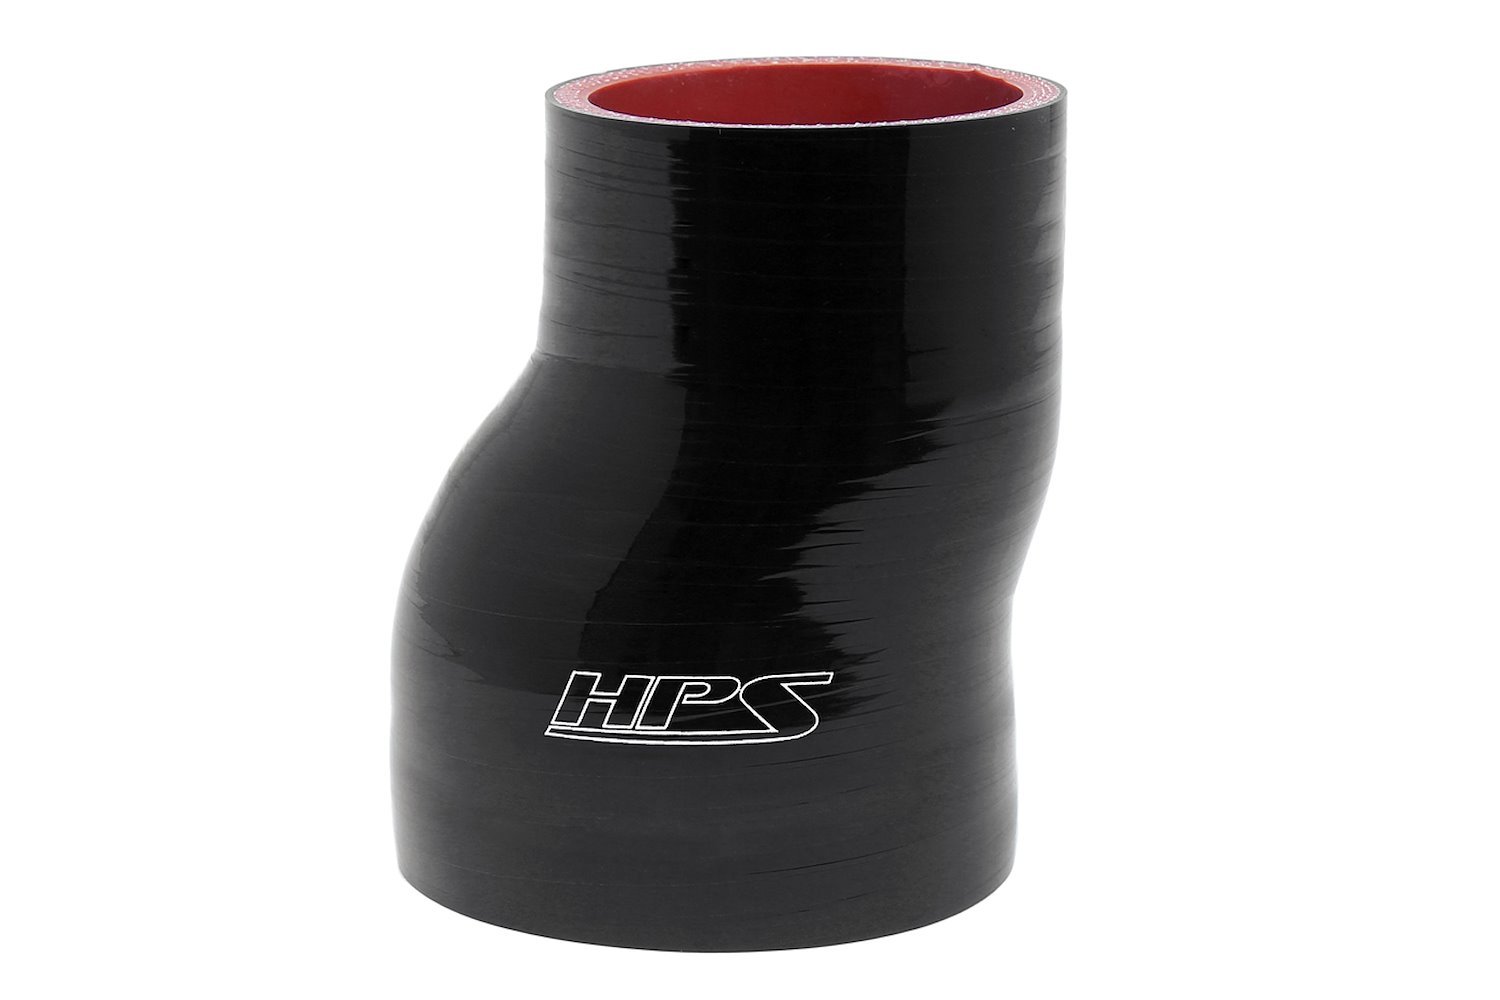 HTSOR-200-238-L6-BLK Offset Reducer, High-Temp 4-Ply Reinforced, 2 in. ID To 2 3/8 in. ID, 6 in. Length.